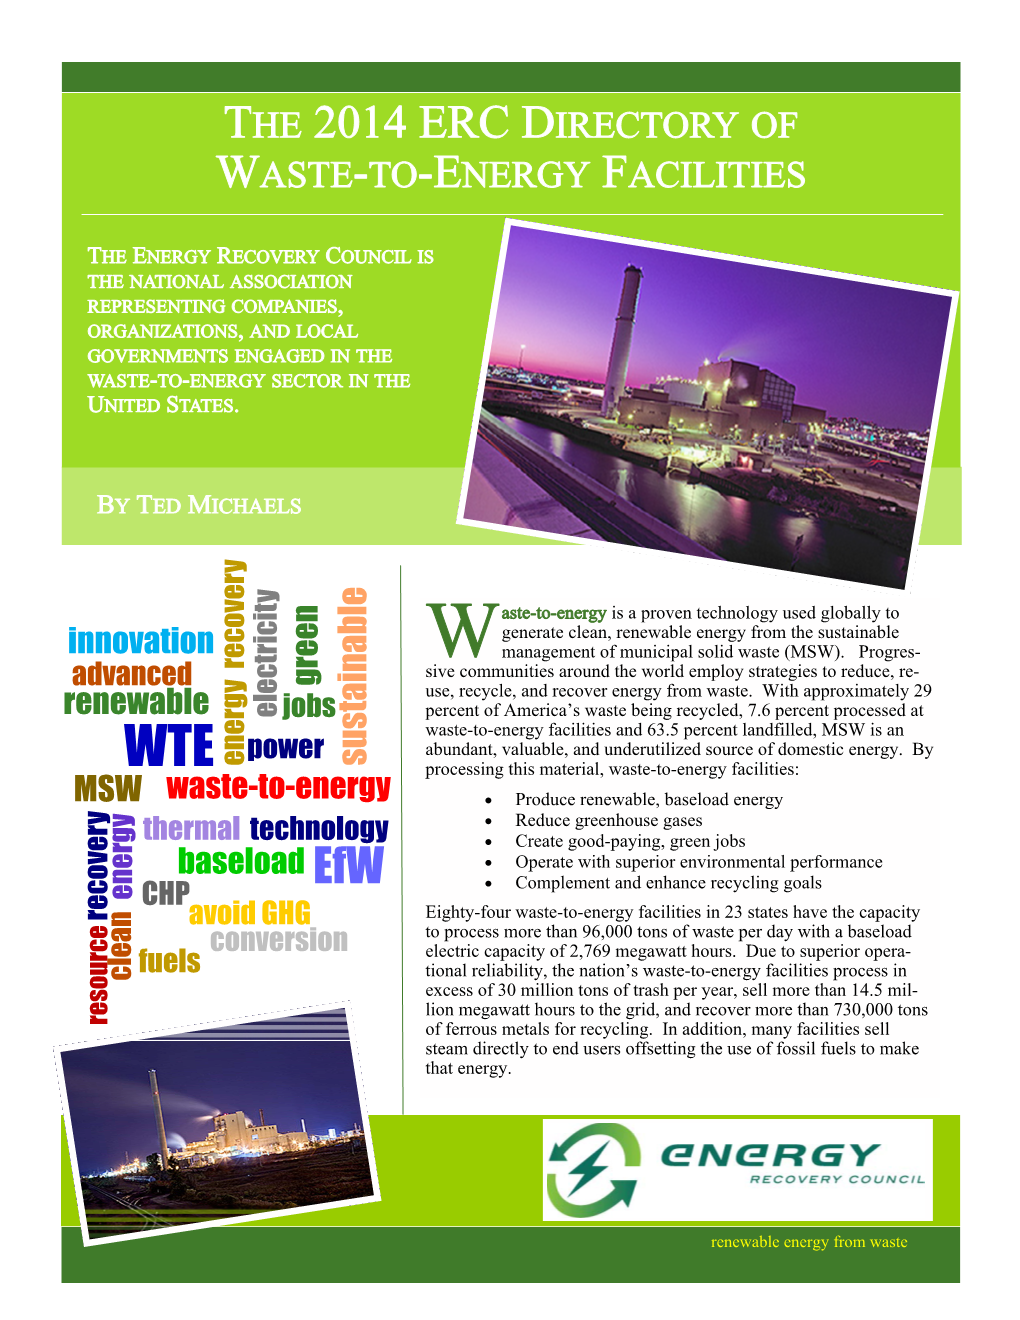 THE 2014 ERC DIRECTORY of WASTE-TO-ENERGY FACILITIES Sustainable